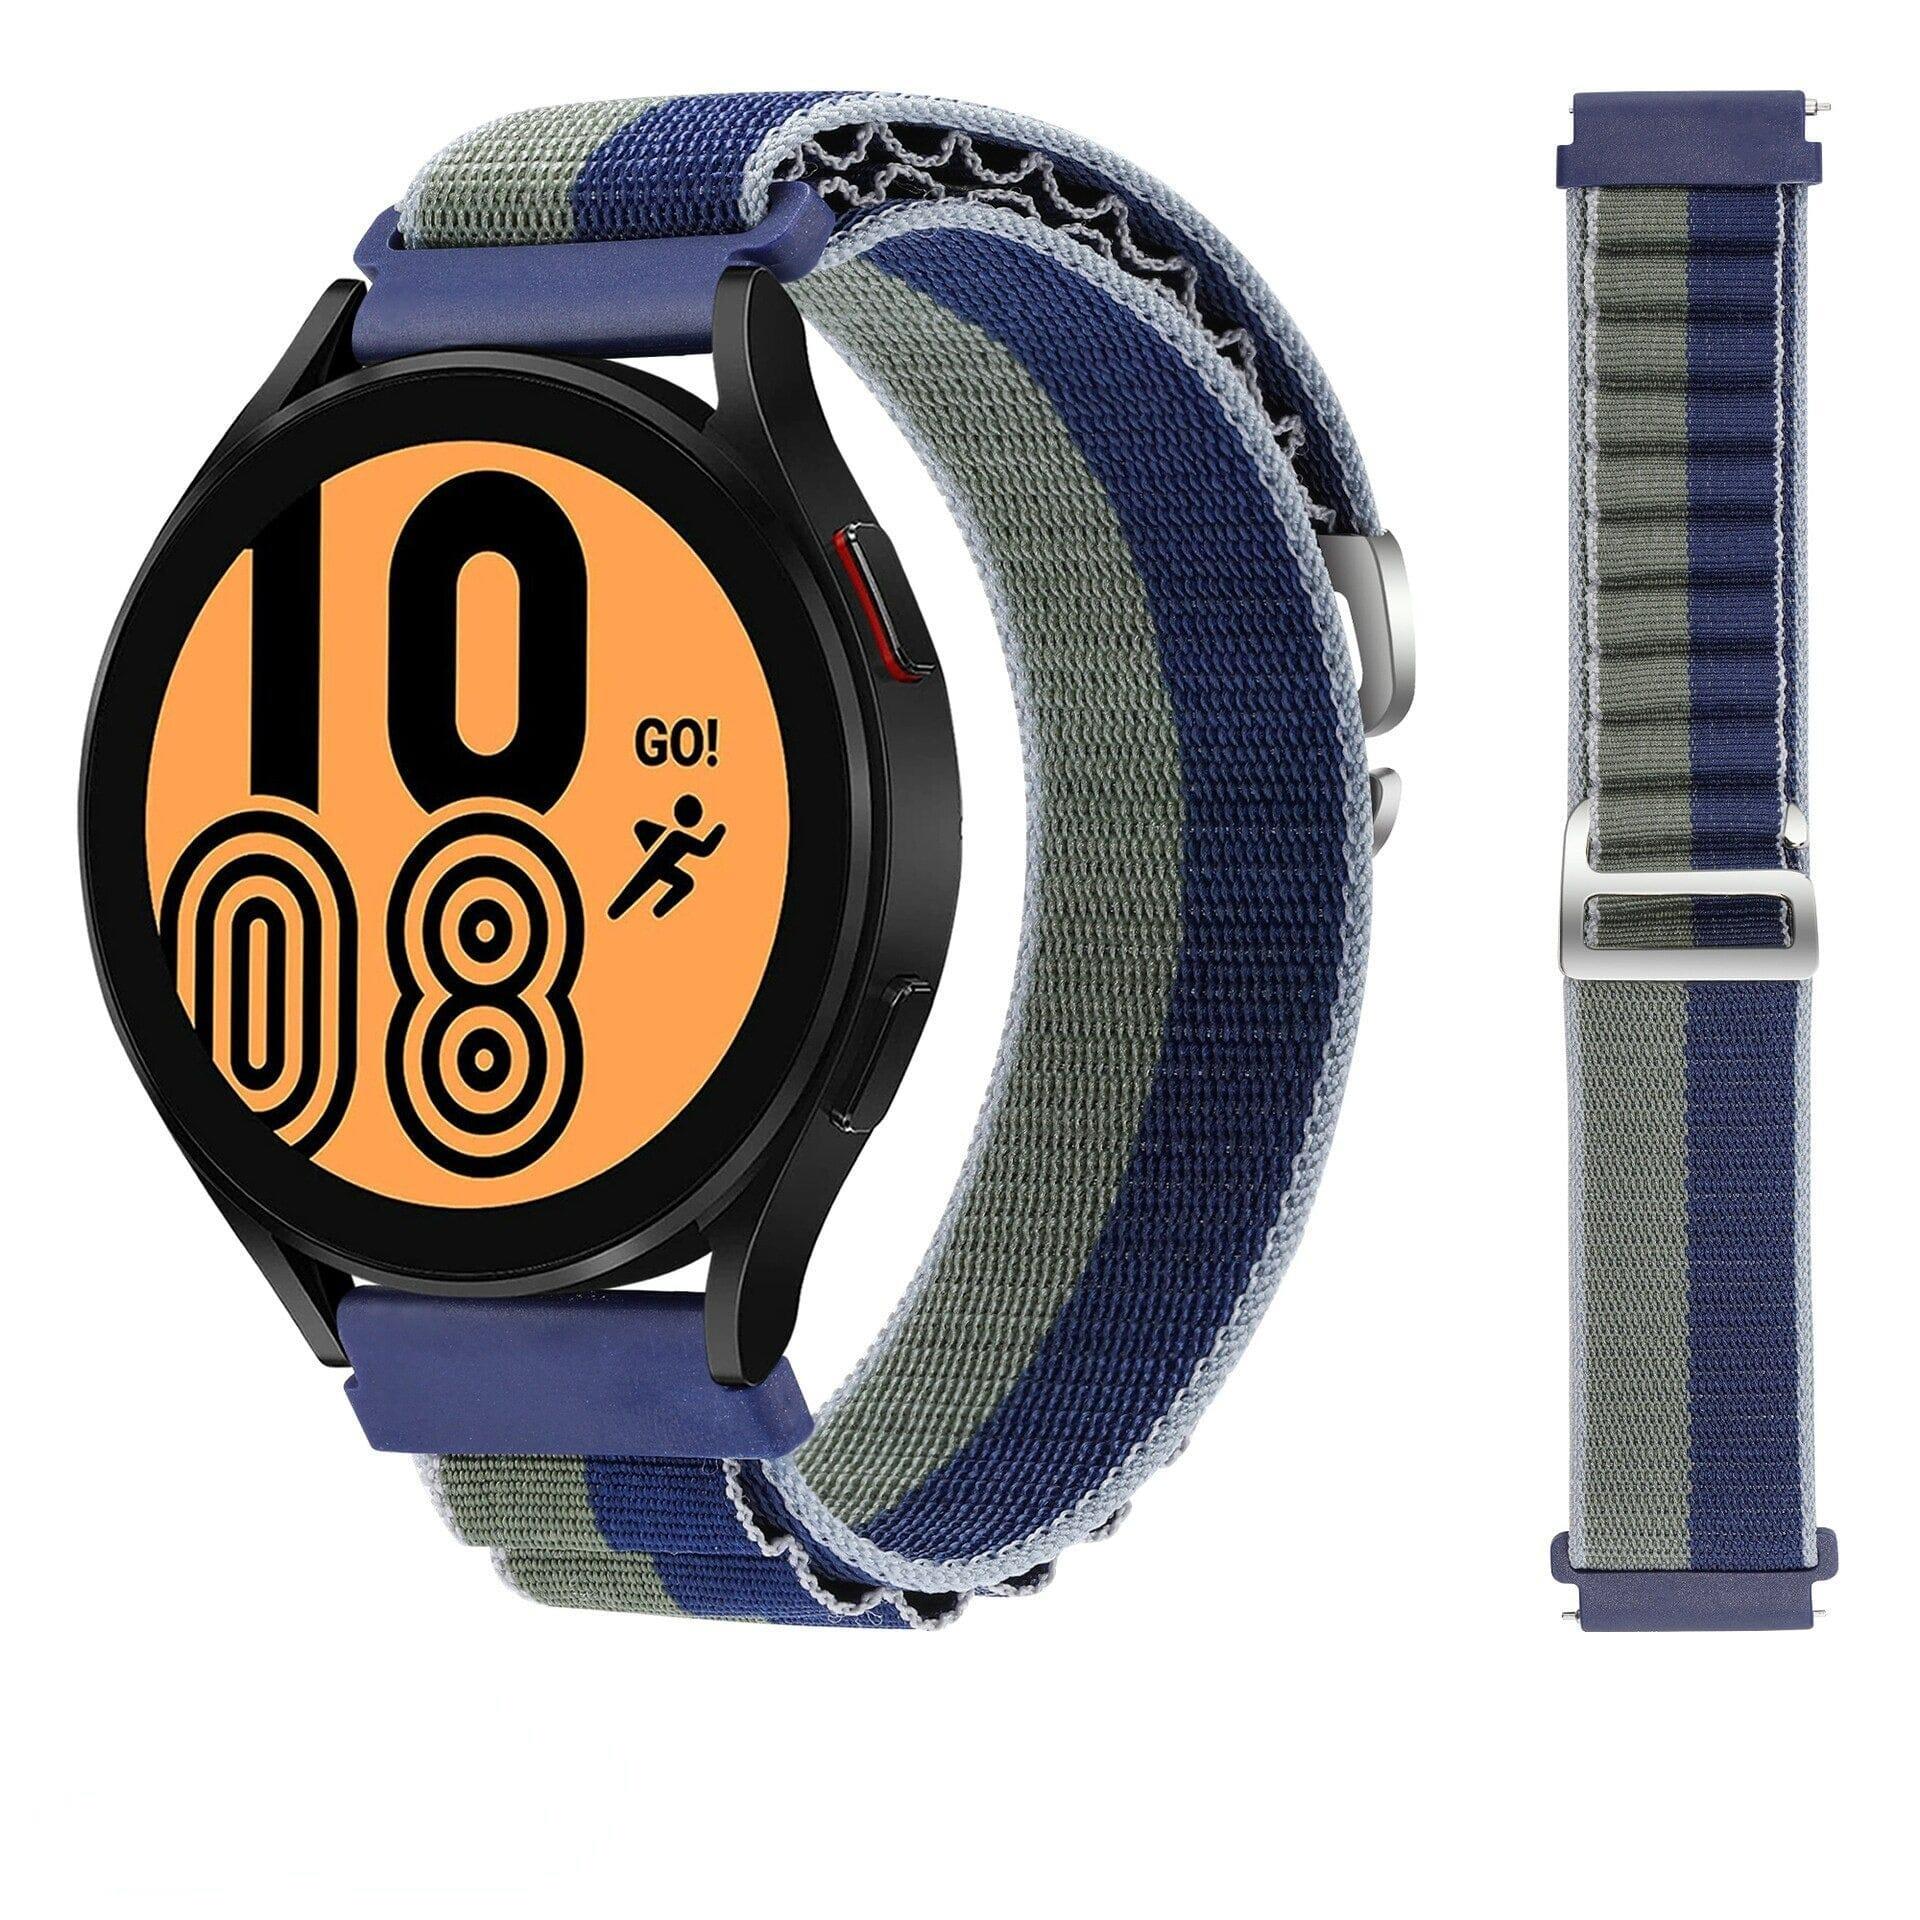 Alpine Loop Watch Straps Compatible with the Huawei Honor S1